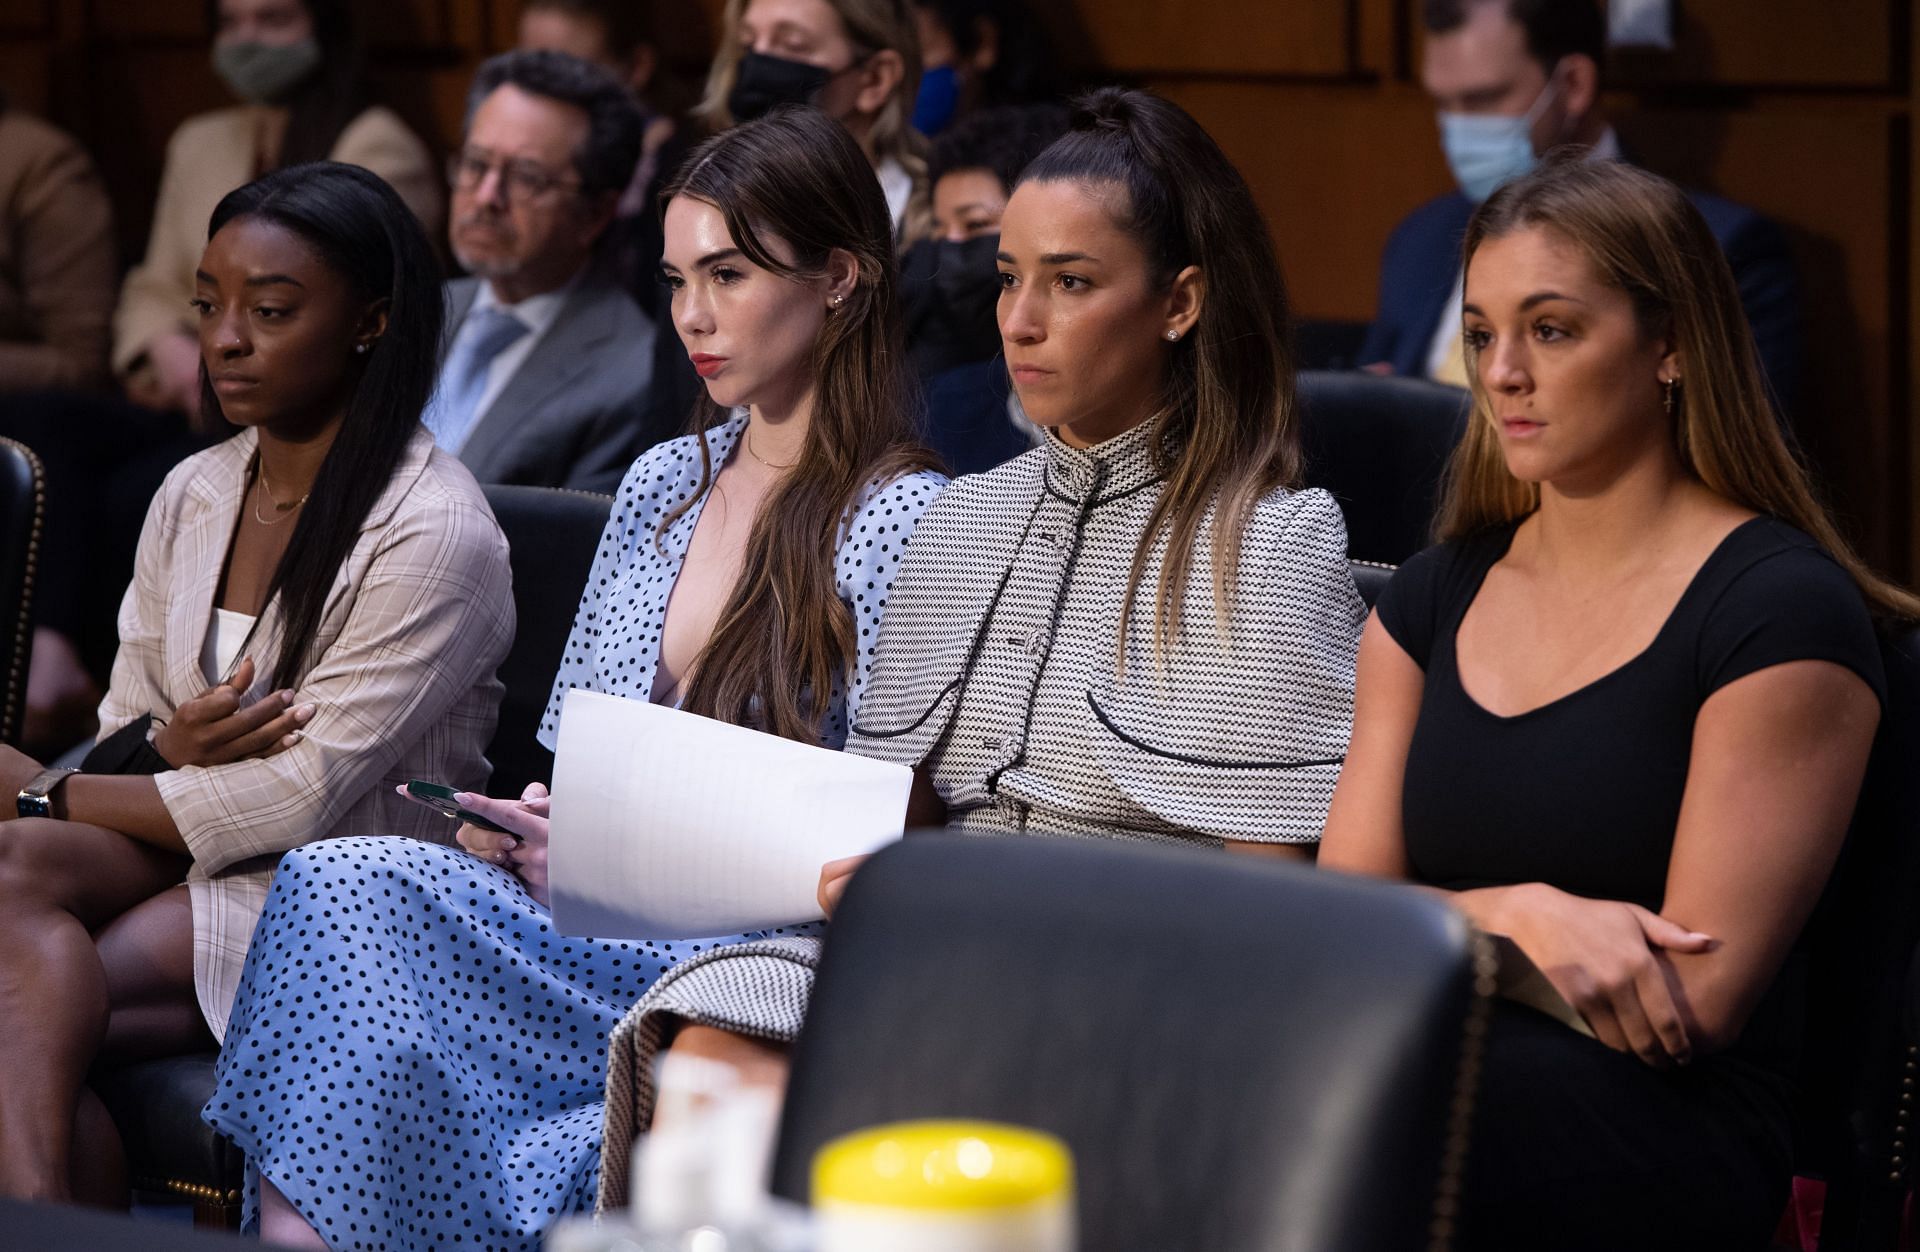 Simone Biles, McKayla Maroney, Aly Raisman, and Maggie Nichols arrive to testify during a Senate Judiciary hearing about the Inspector General&#039;s report on the FBI handling of the Larry Nassar investigation of sexual abuse, in Washington, DC.